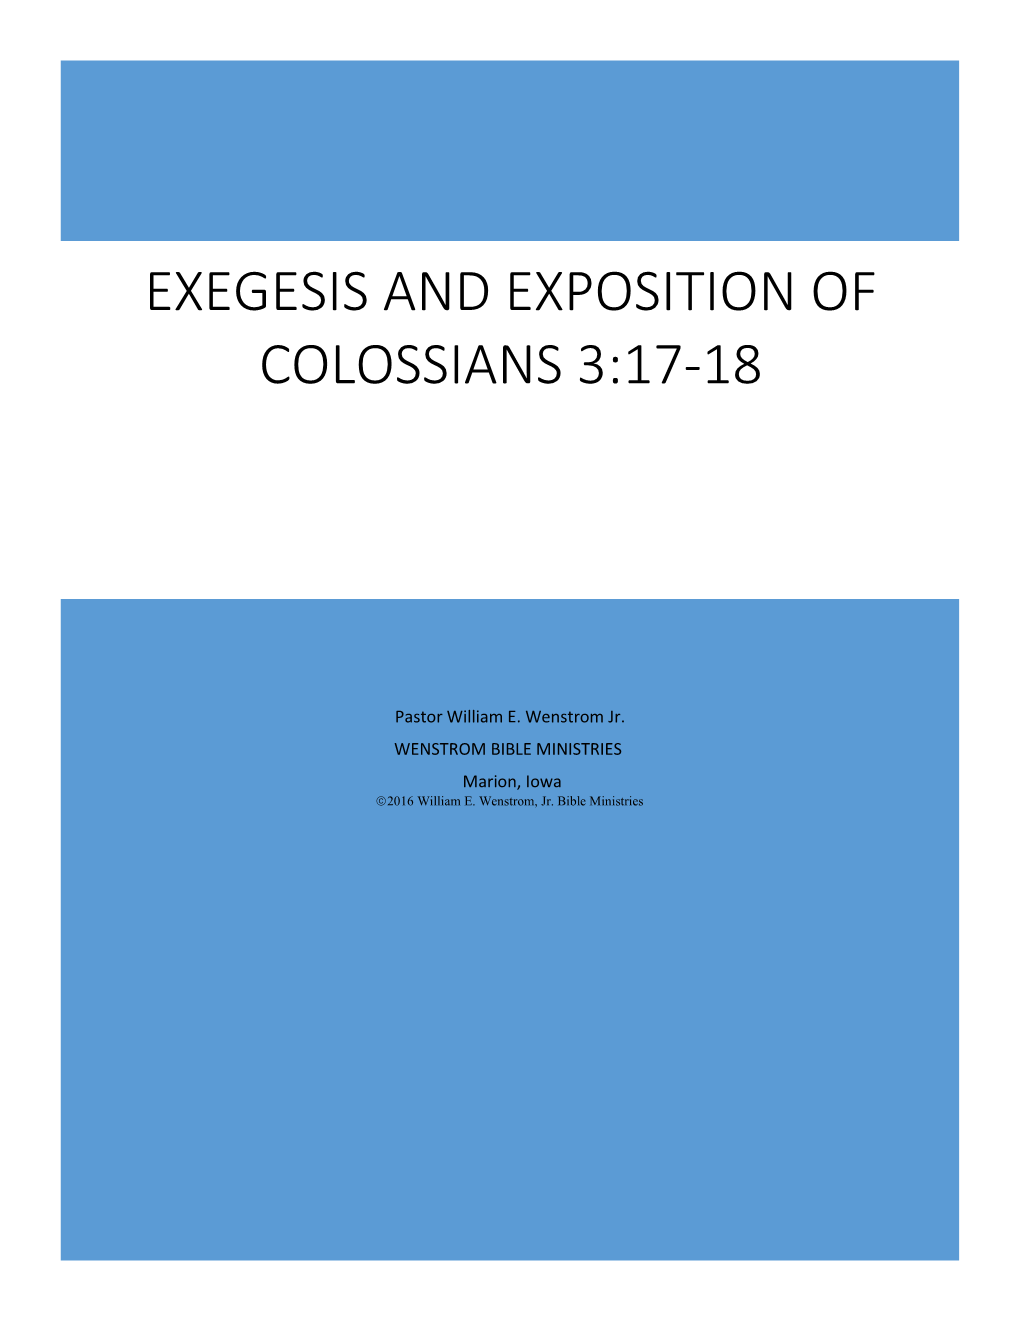 Exegesis and Exposition of Colossians 3:17-18